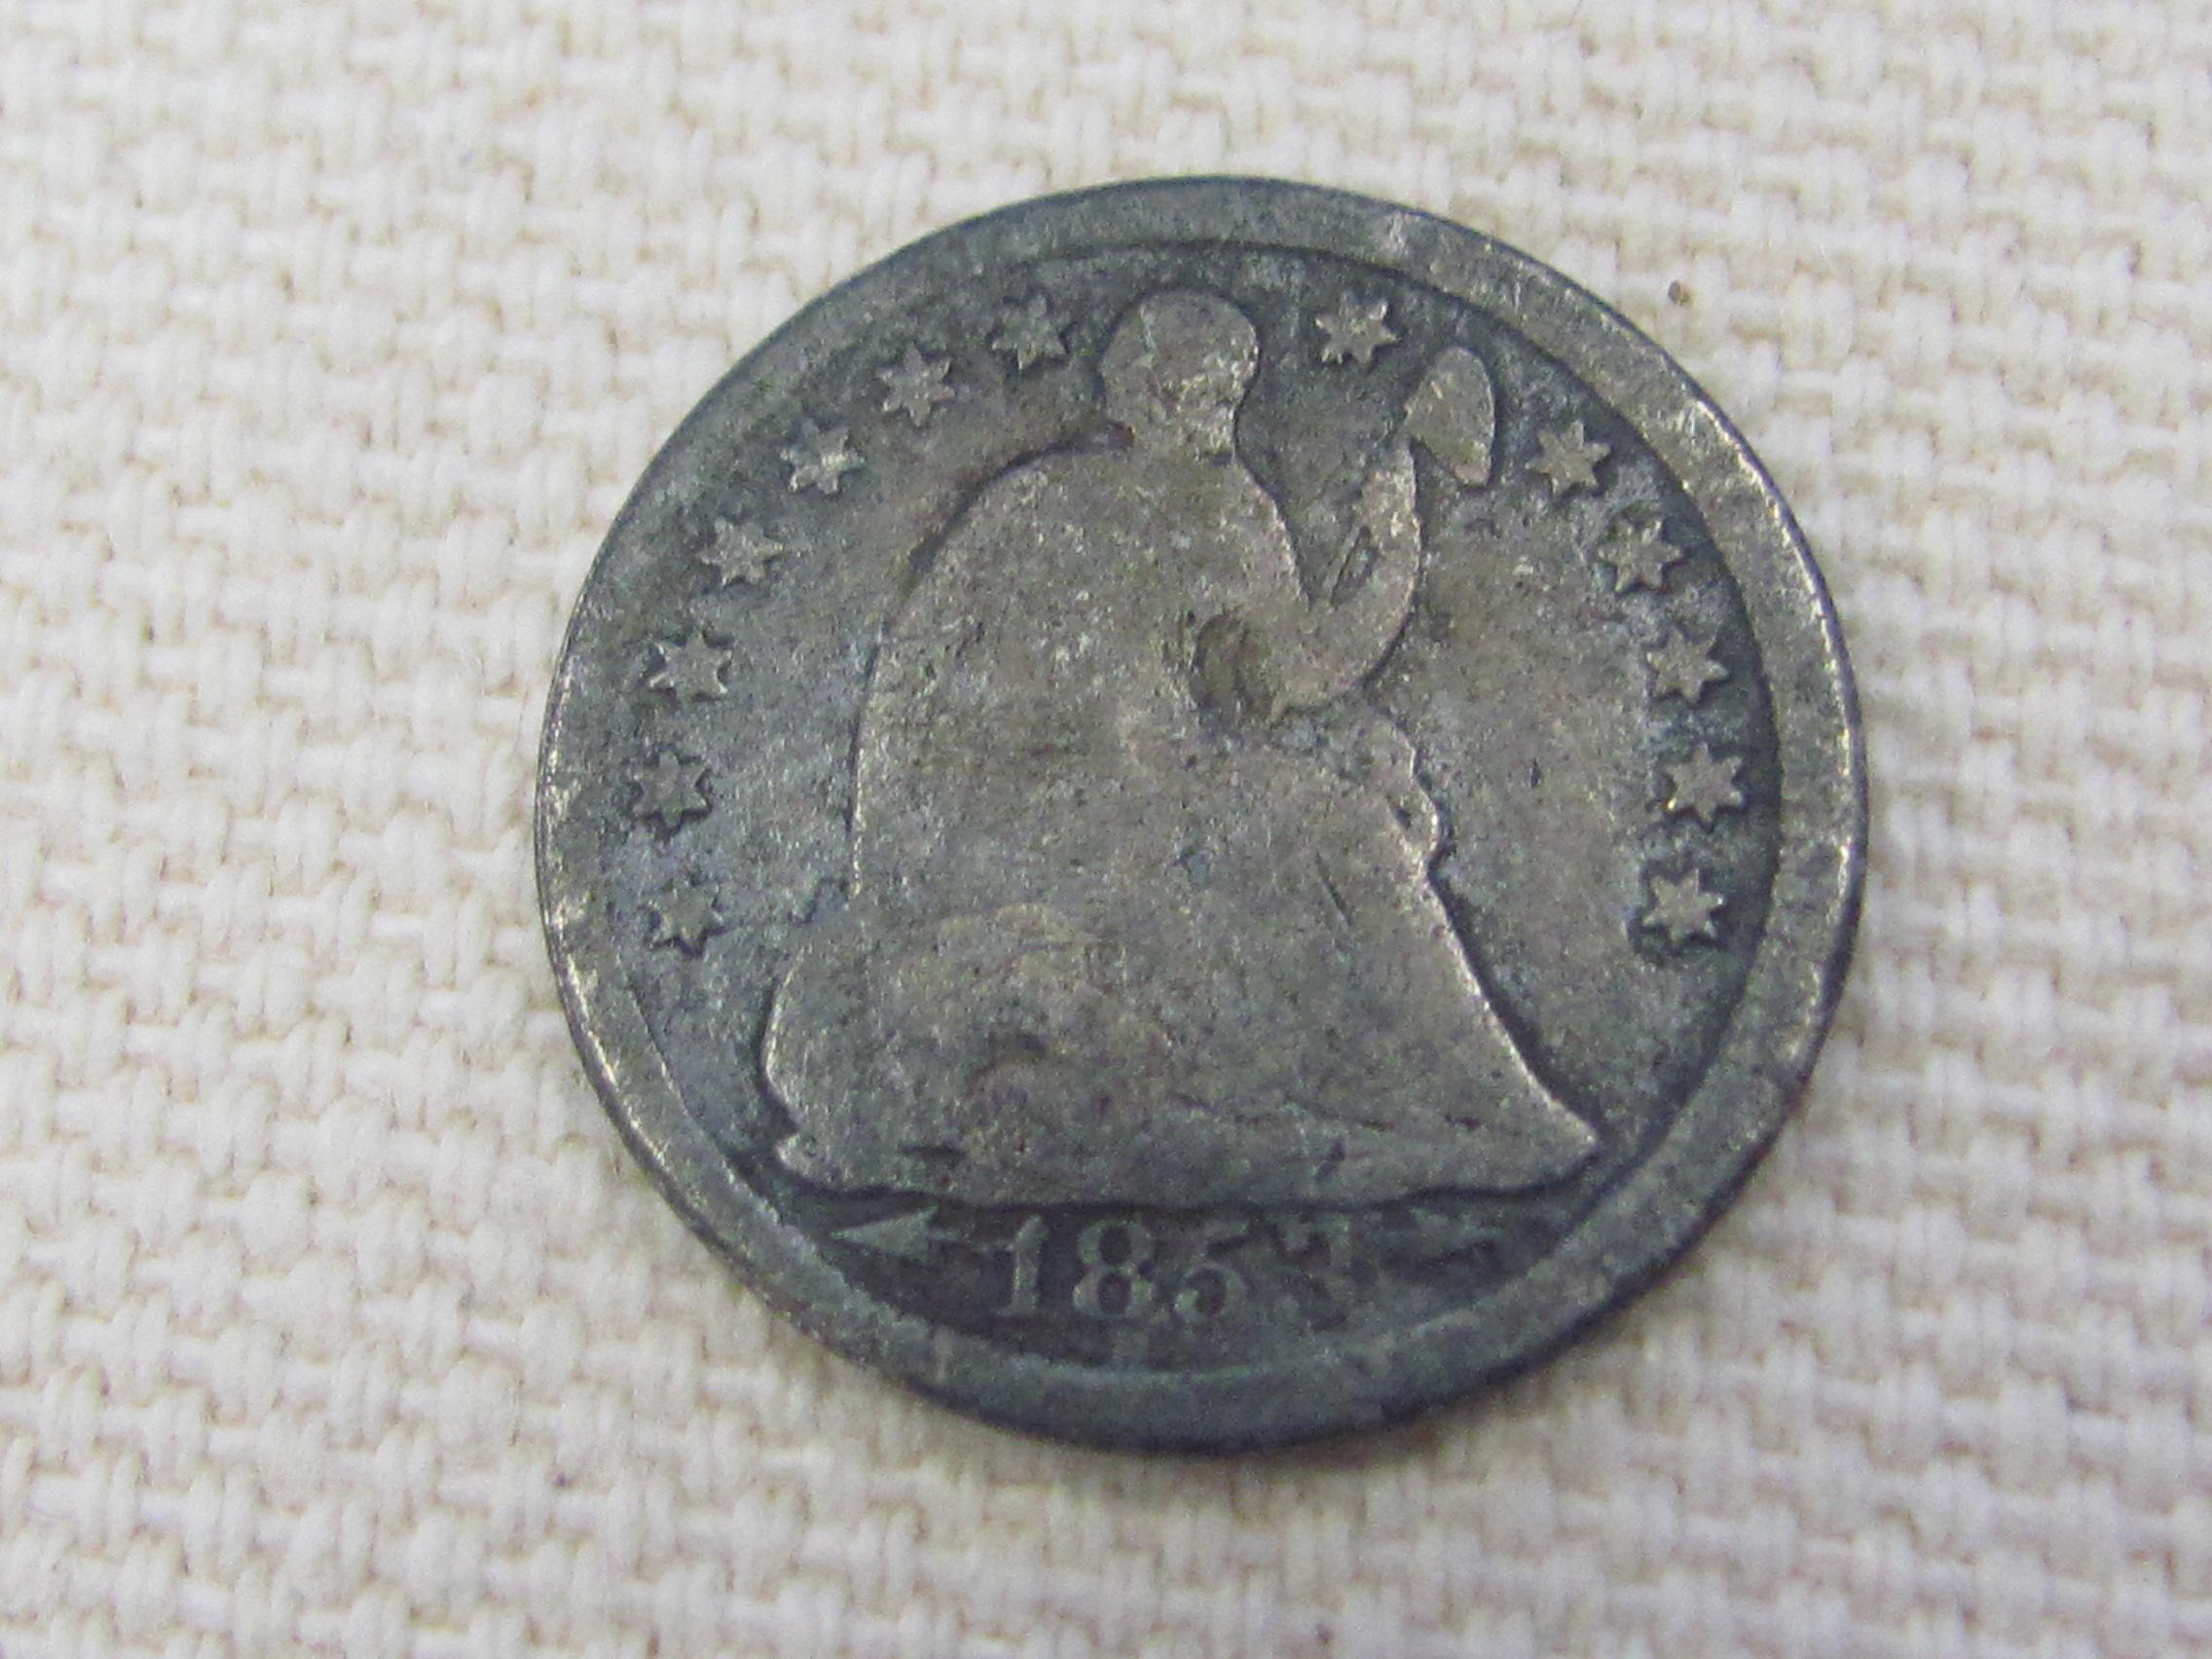 1853 Seated Liberty Half Dime – With arrows